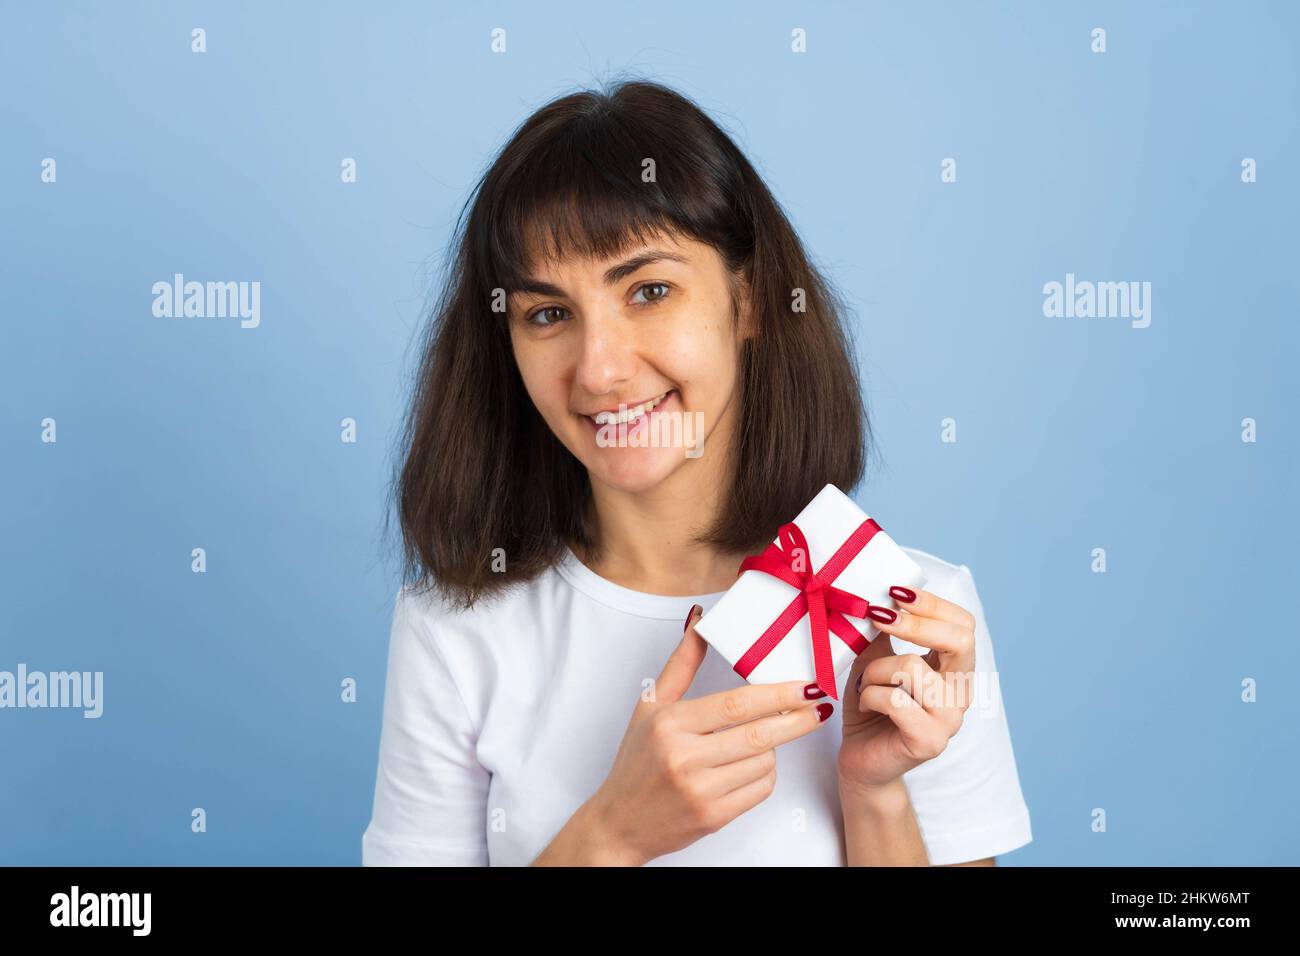 Smiling happy woman holding gift box isolated on blue background. Valentines day or birthday concept Stock Photo